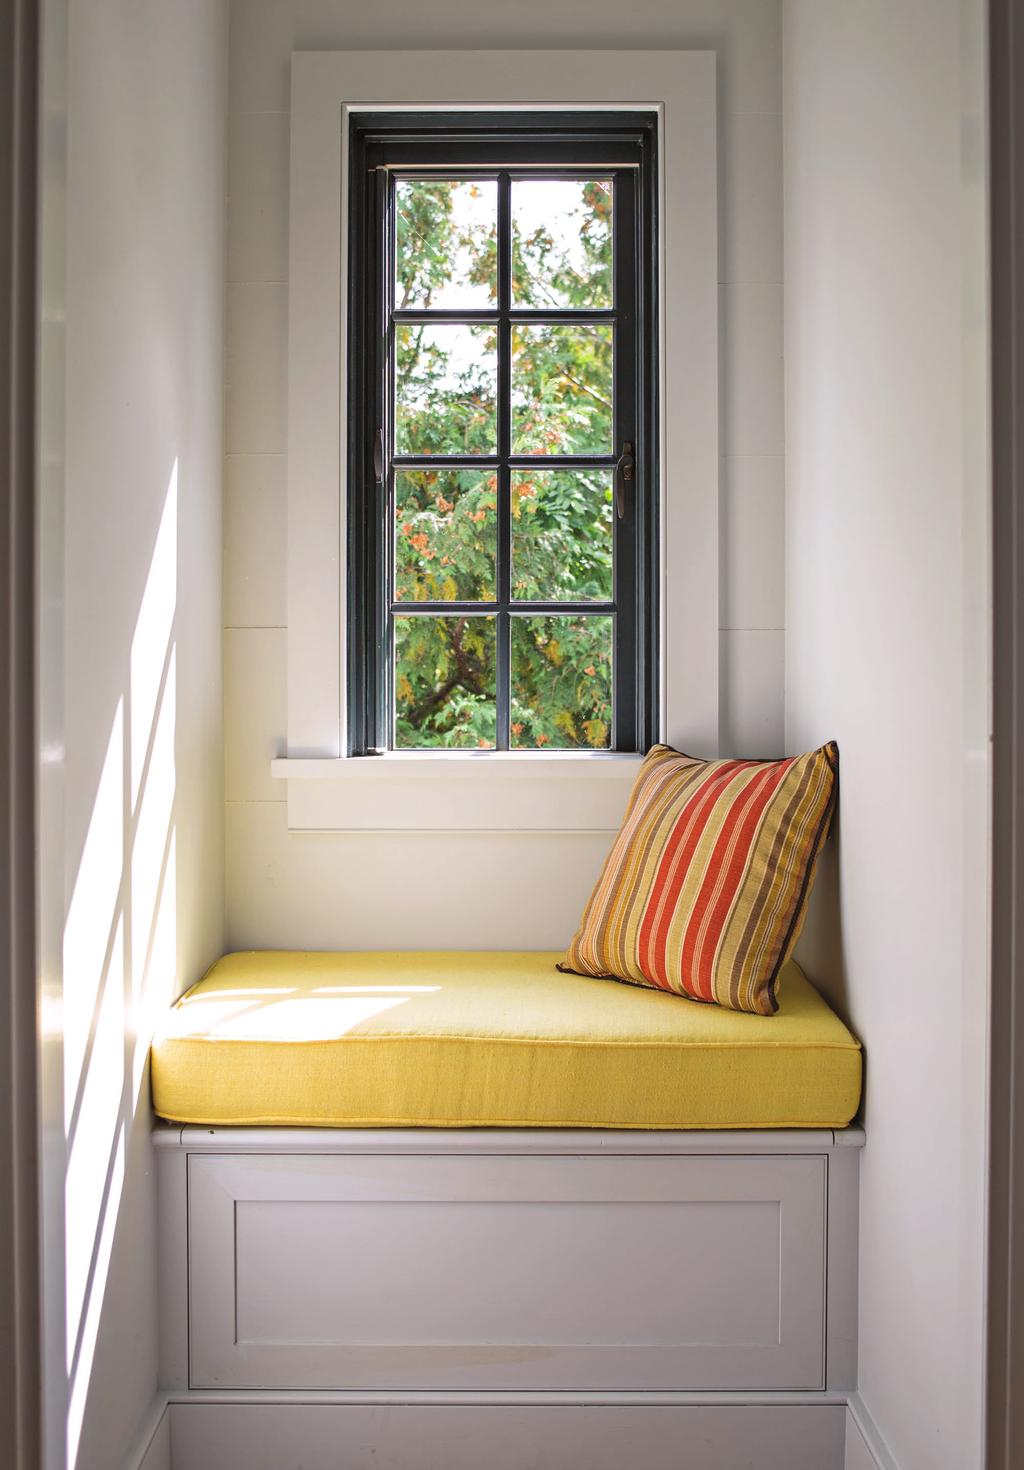 this photo: A narrow window with a seat brings much-needed light into the tunnellike staircase.